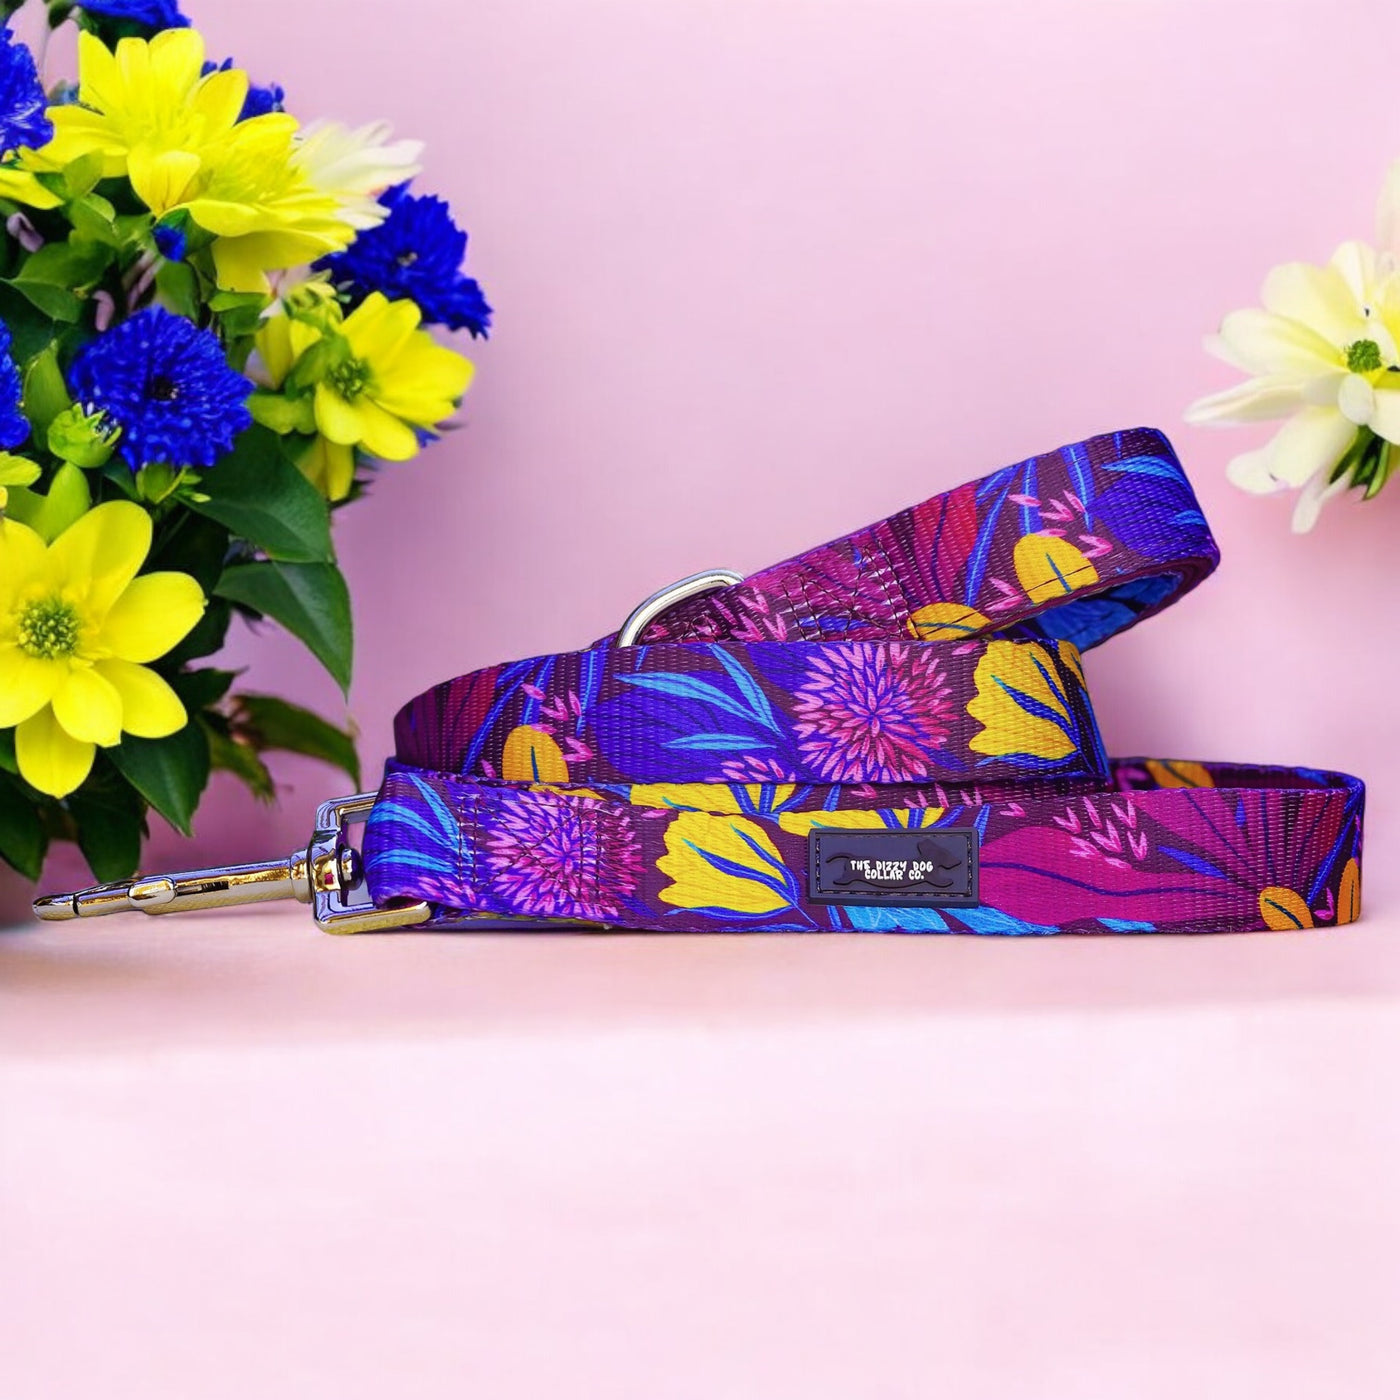 a vibrant dog leash with a colourful floral pattern, featuring a silver clasp. The leash is laid out on a soft pink background. In the background, there is a bouquet of bright yellow and blue flowers with green leaves, enhancing the lively and colourful appearance of the scene.